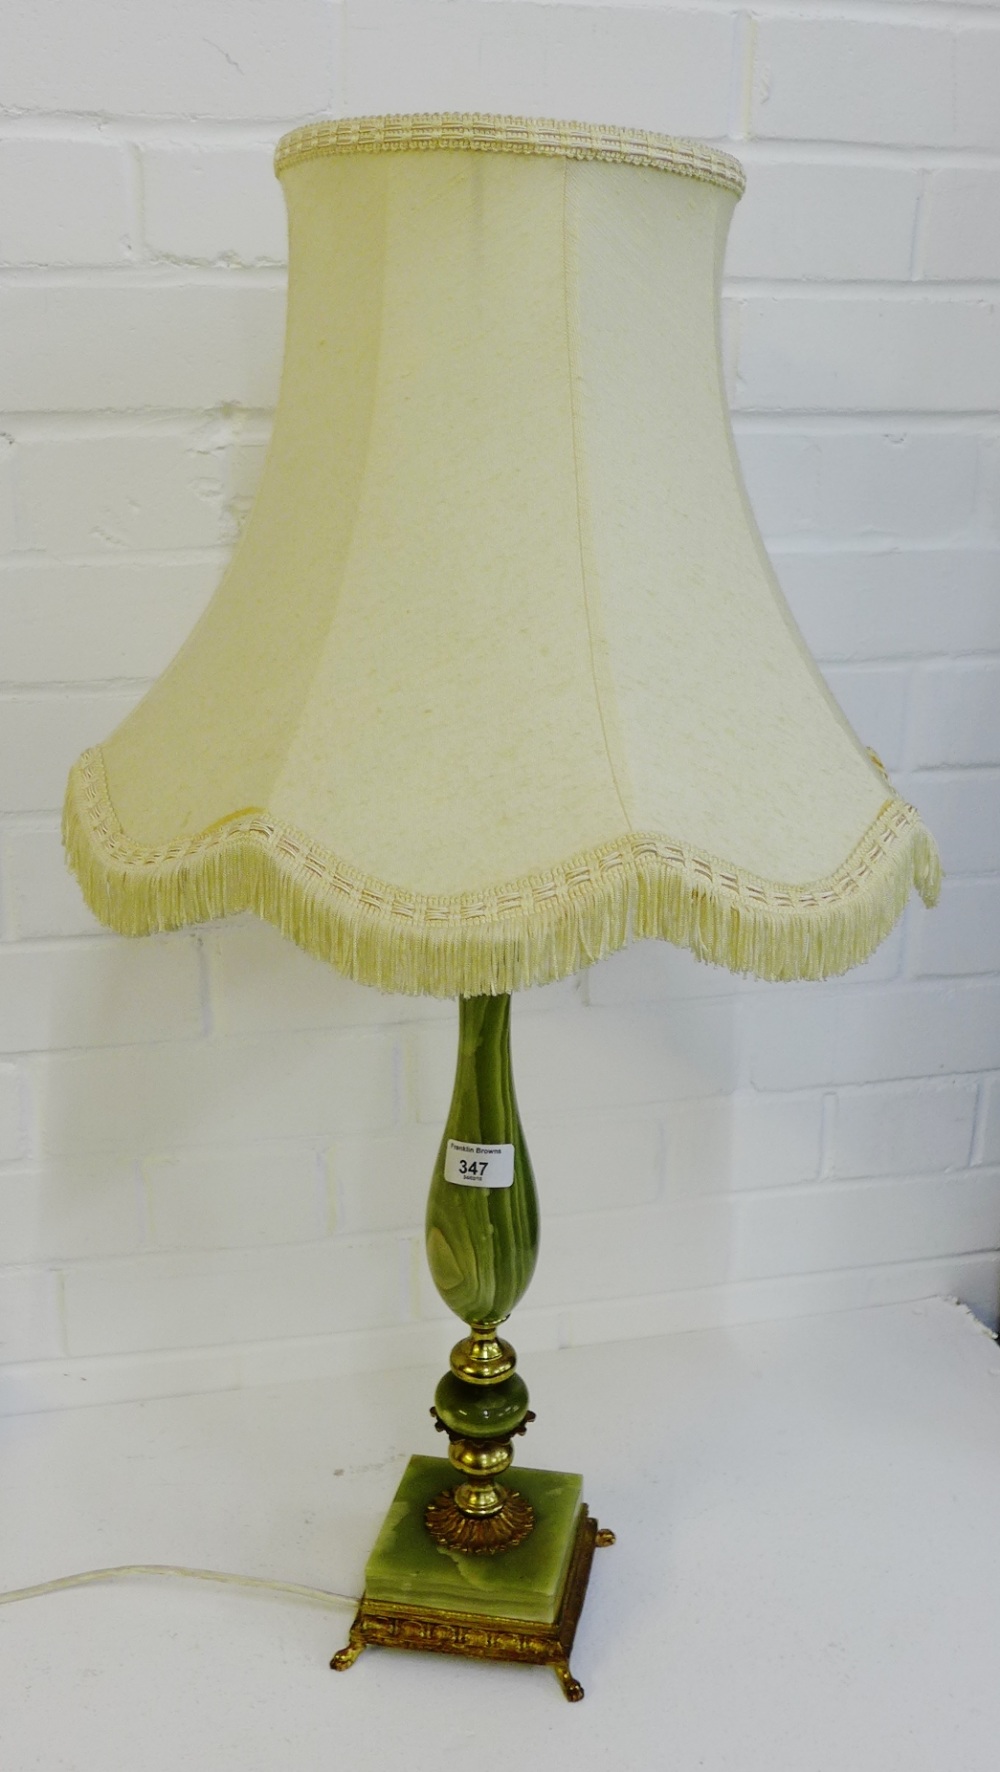 An onyx and brass mounted table lamp and shade